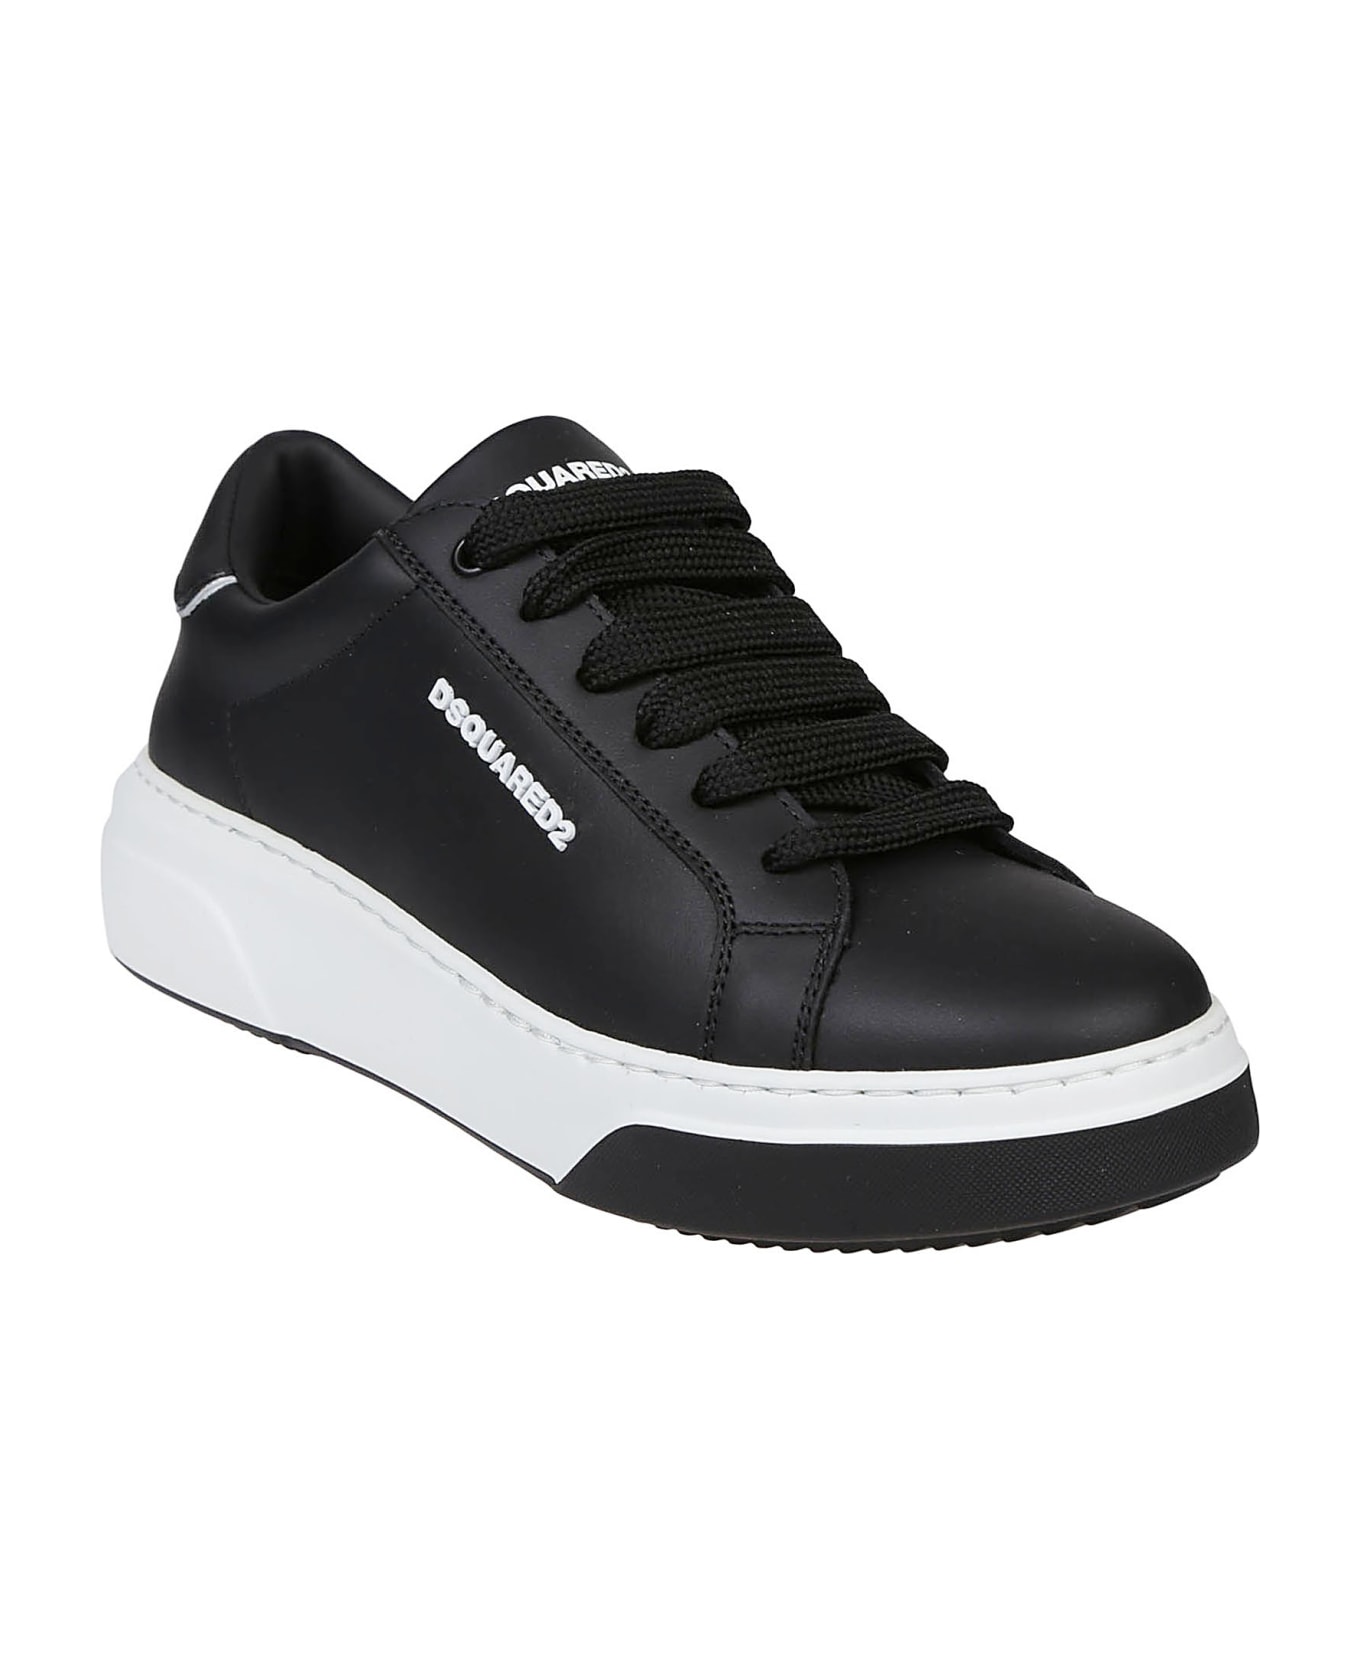 Dsquared2 Bumper Lace-up Low Top Sneakers - Nero/nero